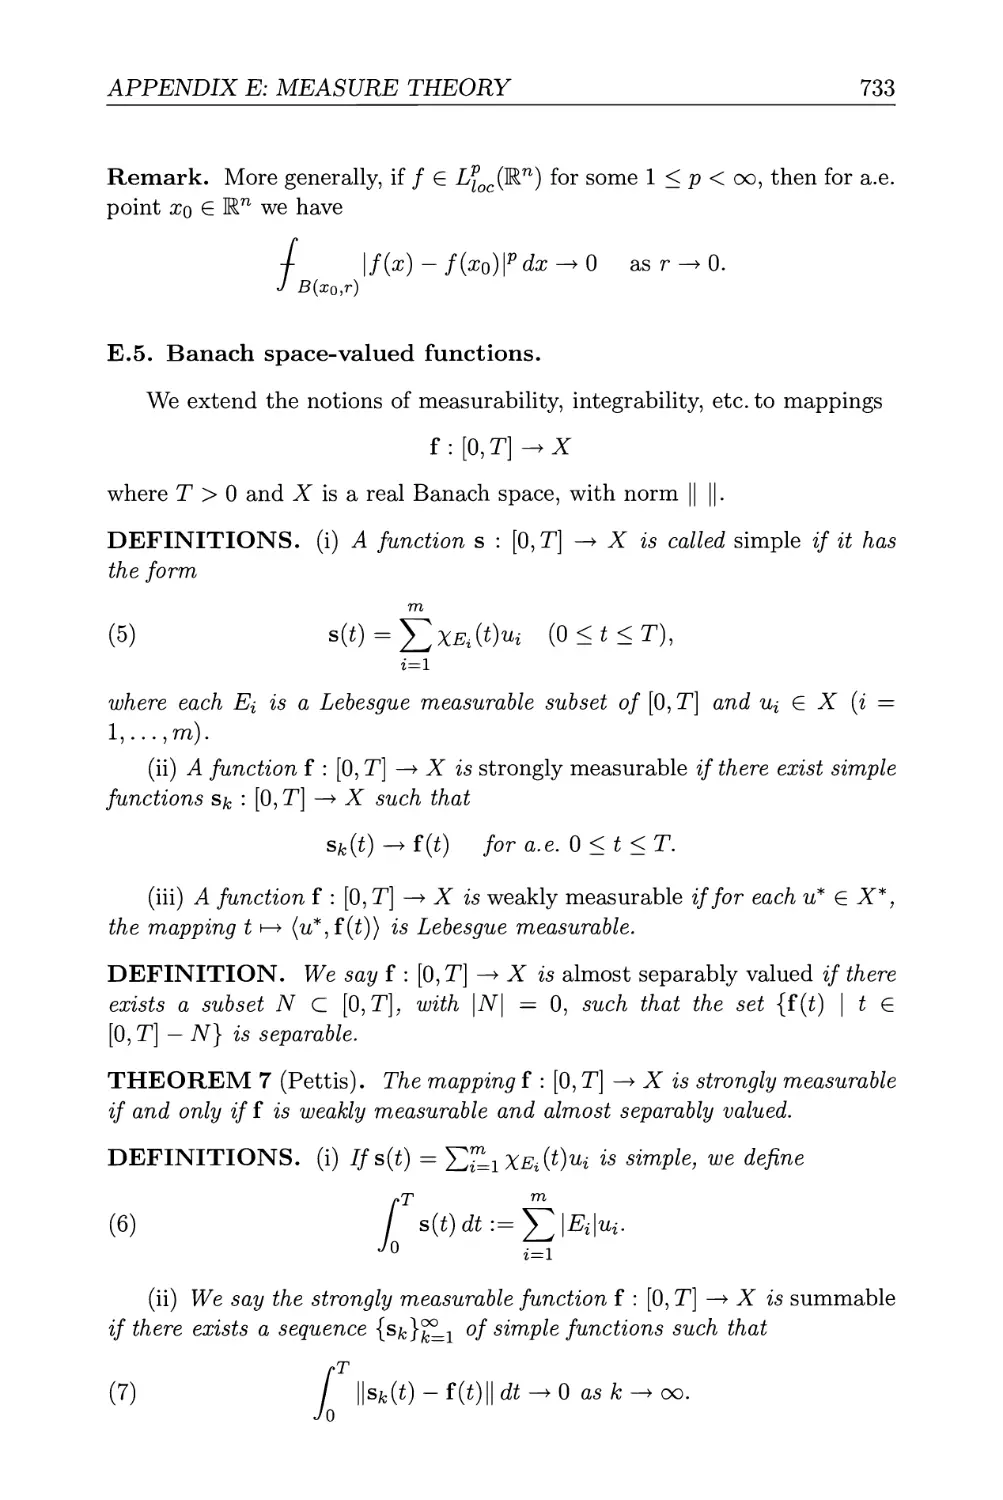 E.5. Banach space-valued functions